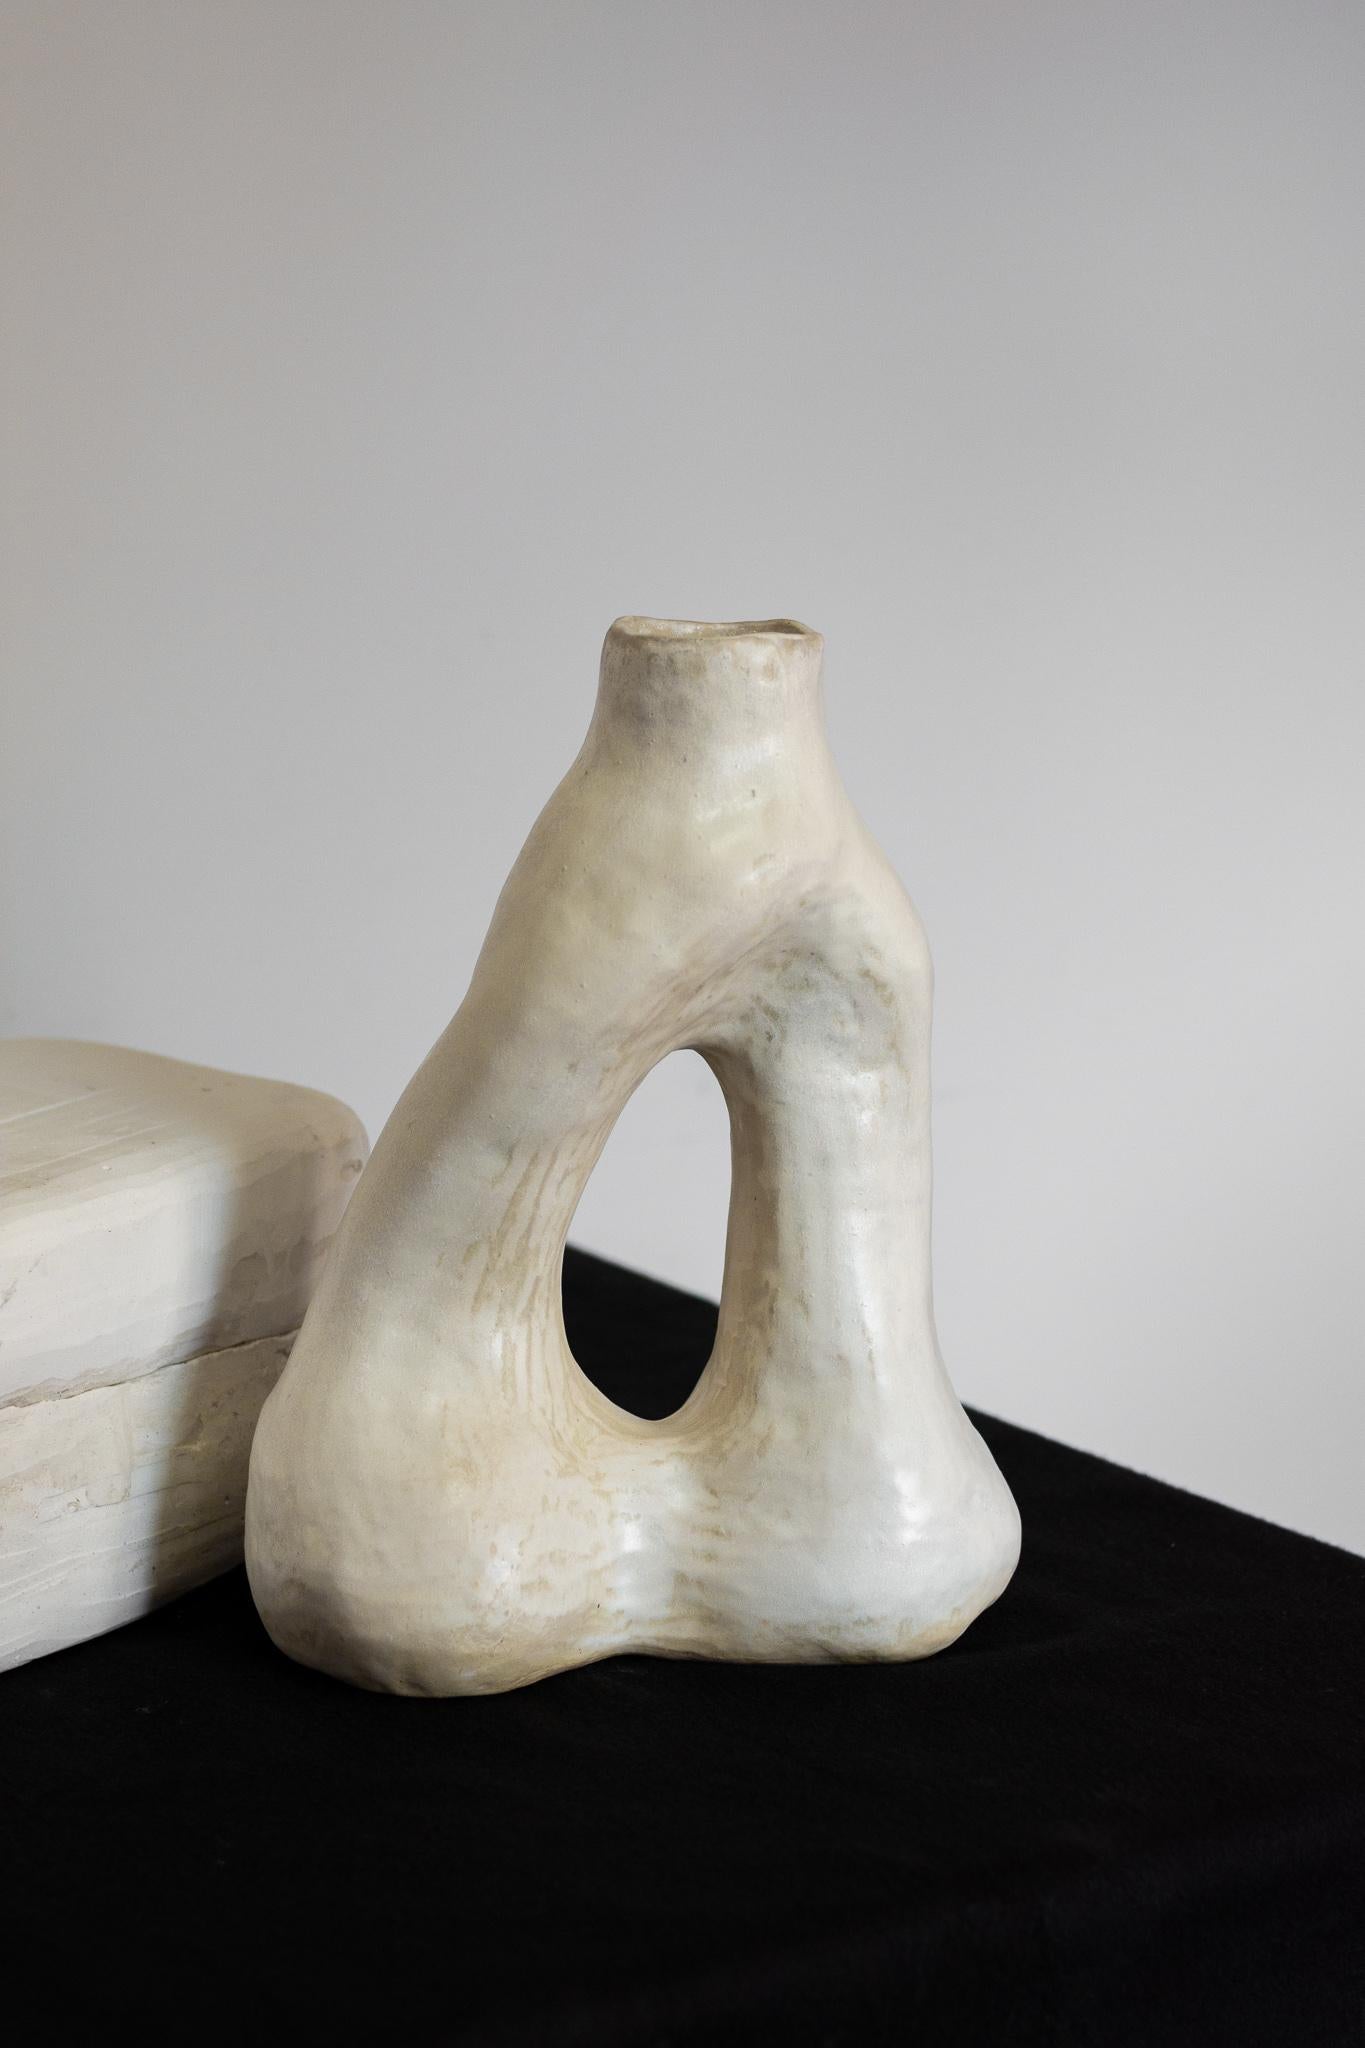 The vase from the Alba series, especially the N.5 vase, is a unique piece that embraces the artisanal process. Manufactured without the use of molds, each vase absorbs the distinct contours and textures of the artist's hand, resulting in a clean and